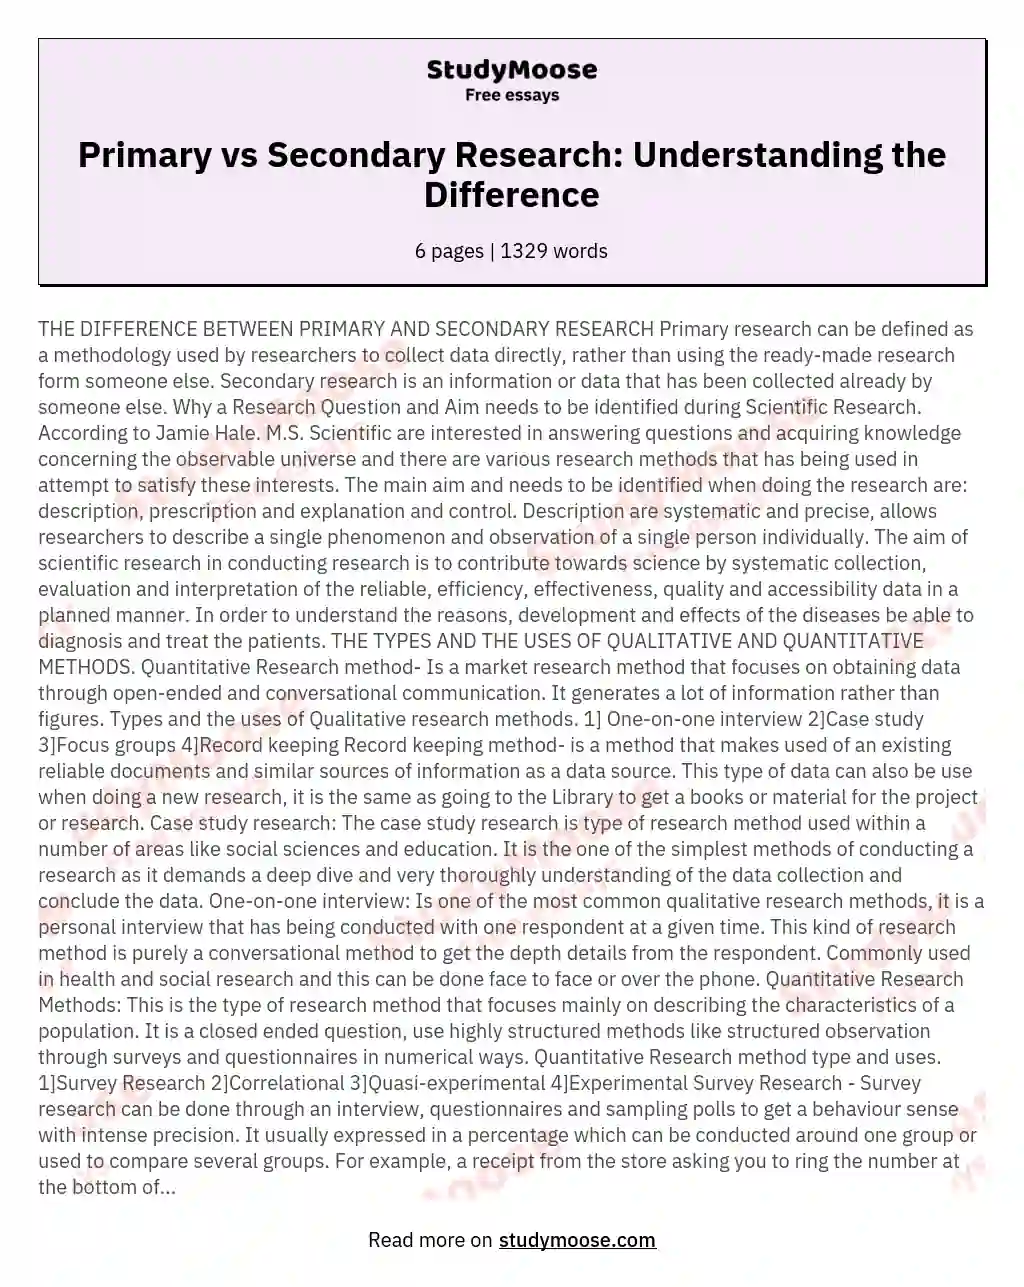 THE DIFFERENCE BETWEEN PRIMARY AND SECONDARY RESEARCH Primary research can be defined